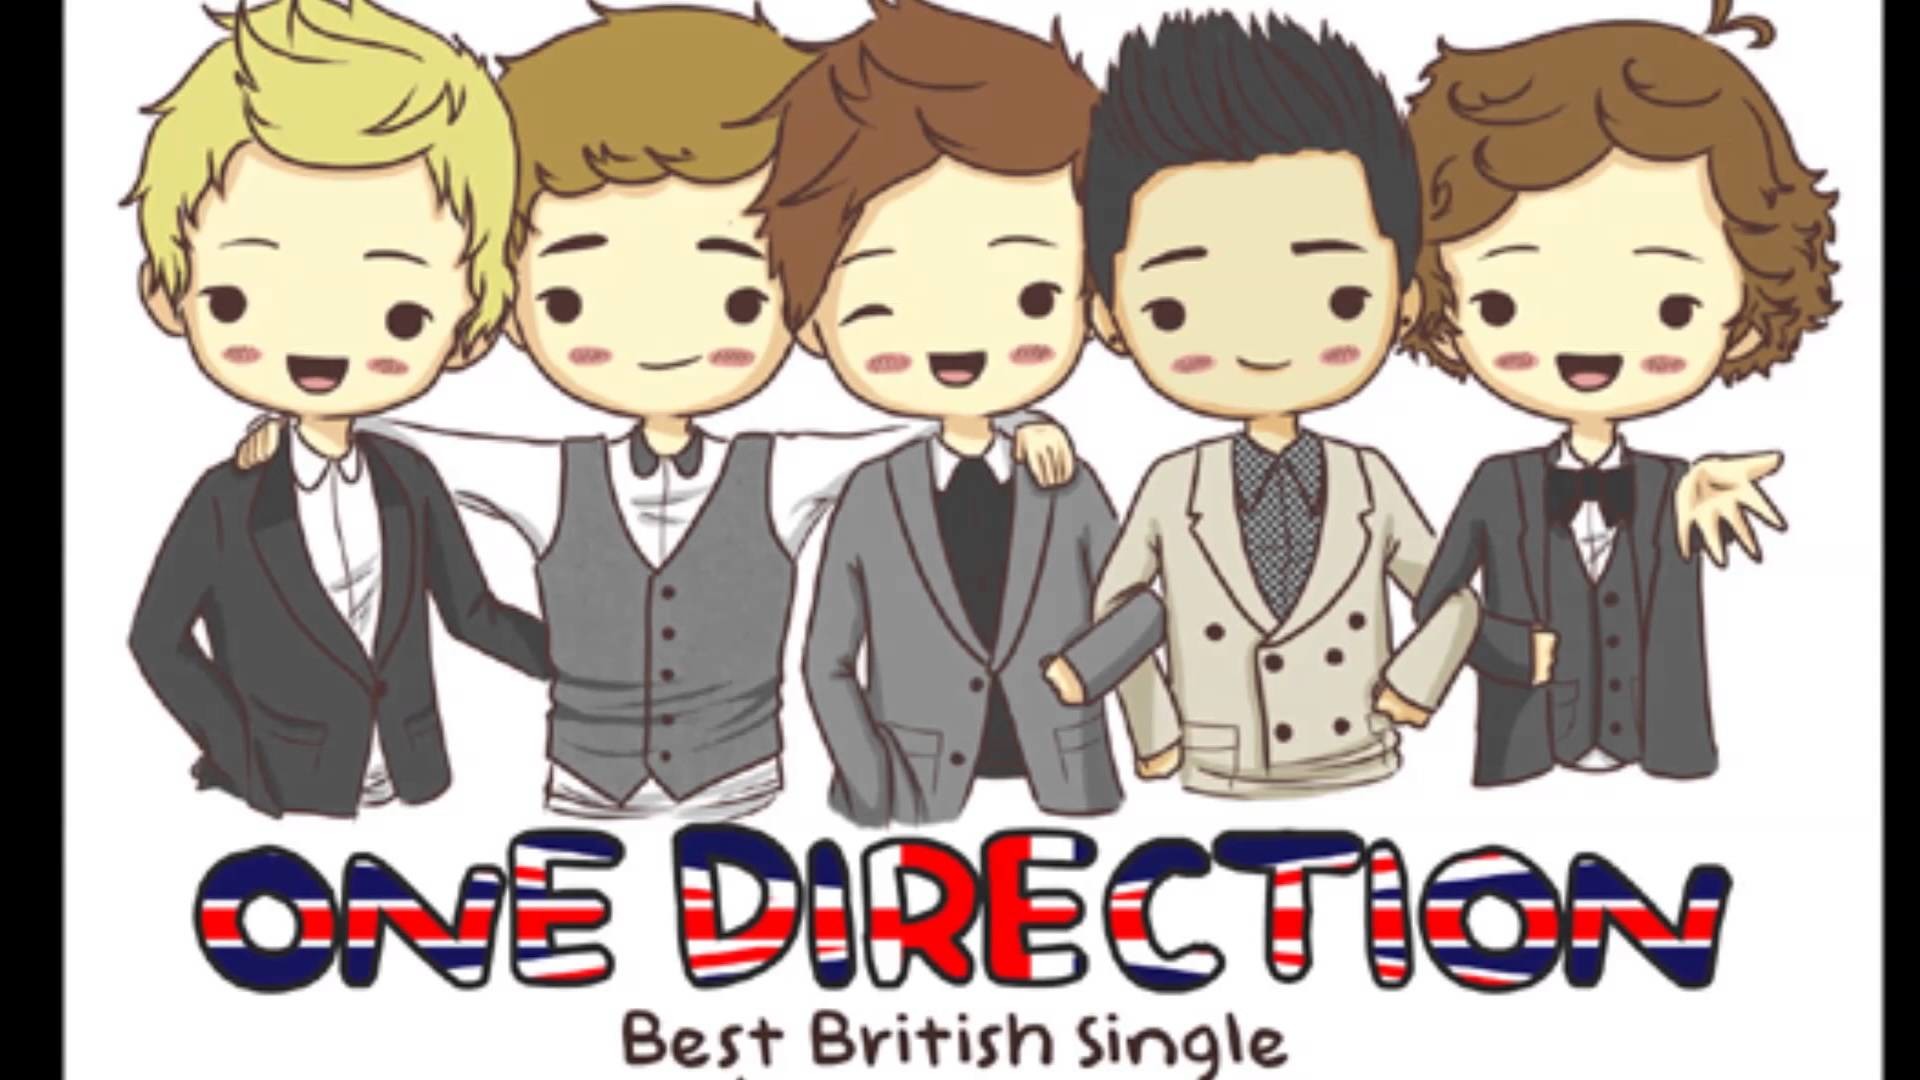 1920x1080 One Direction Cartoon Images | TheCelebrityPix